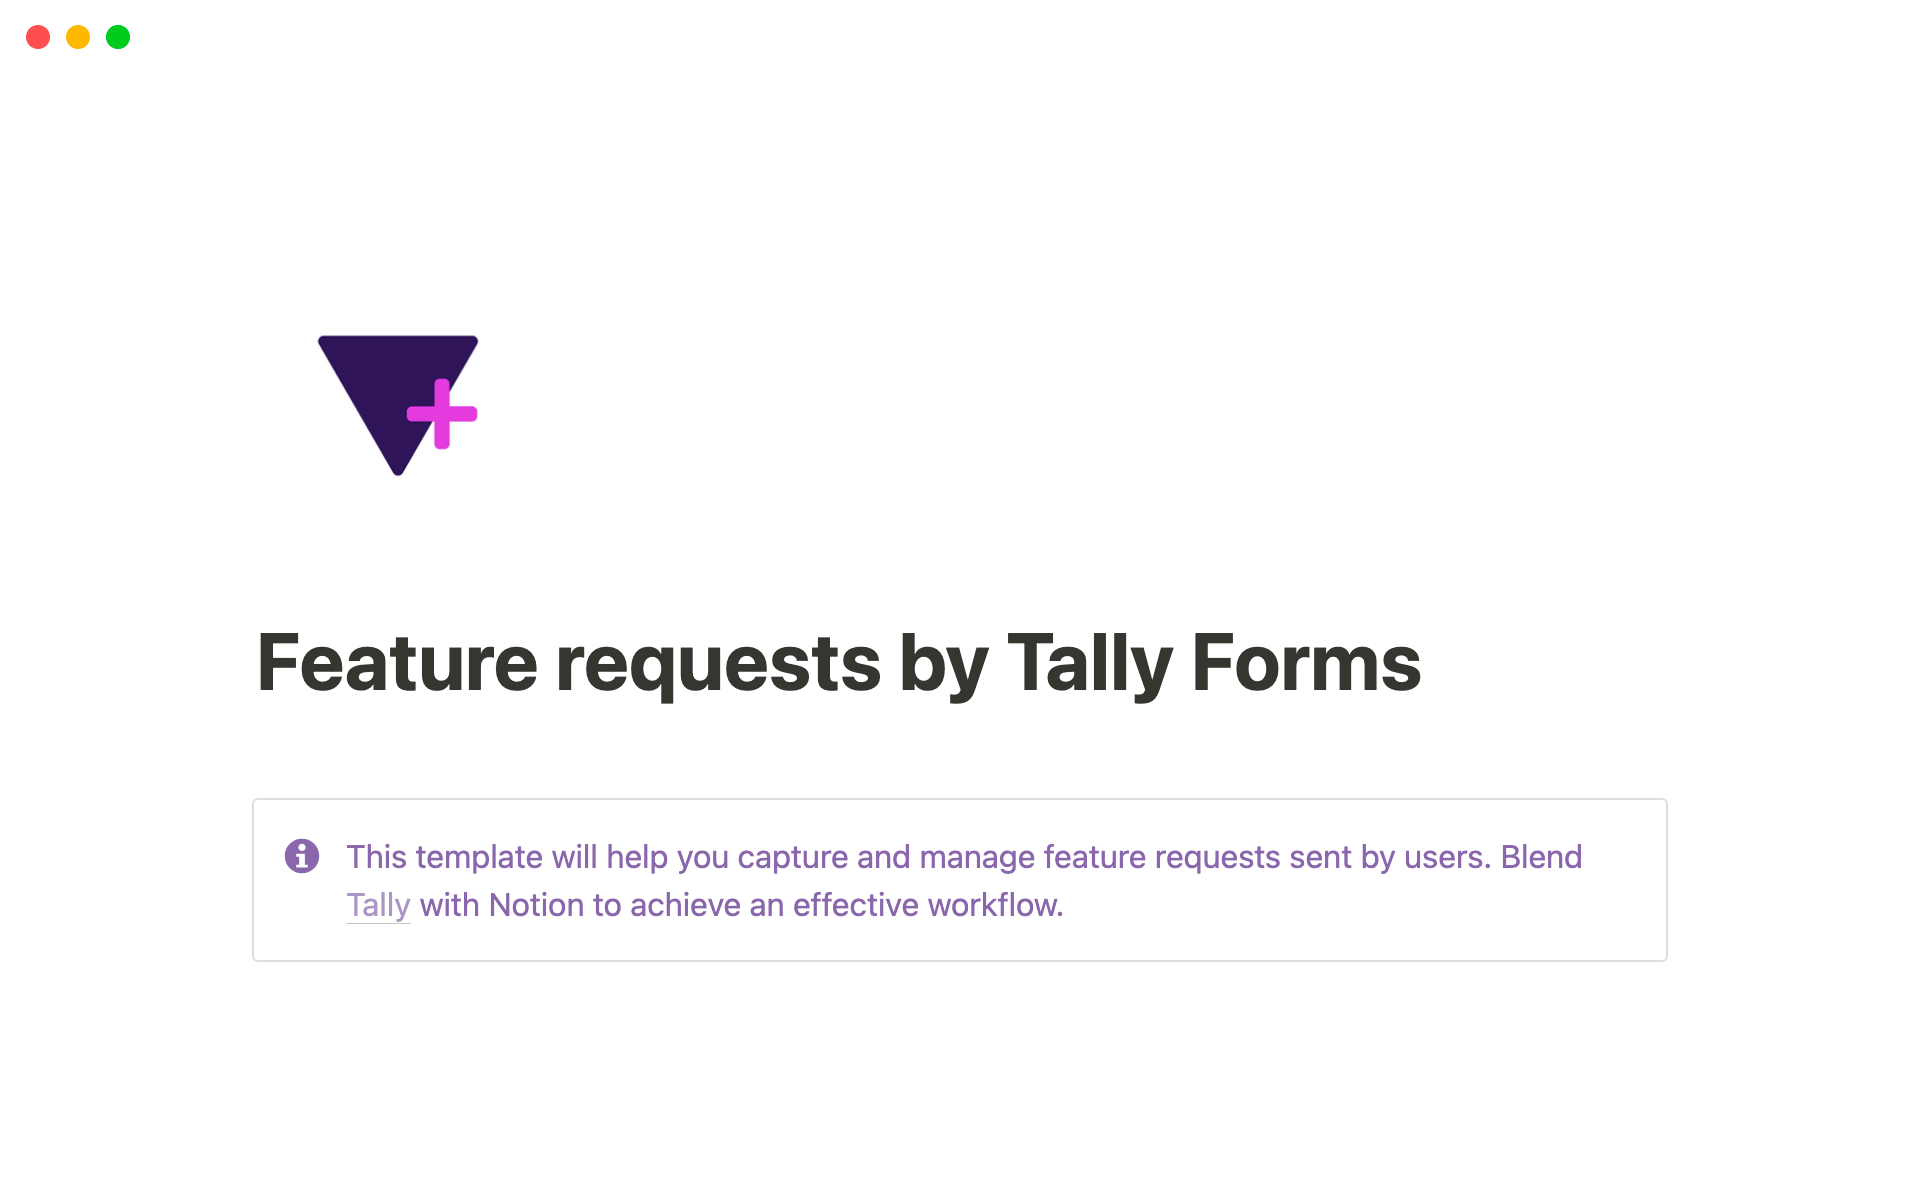 This template will help you capture and manage feature requests by your users